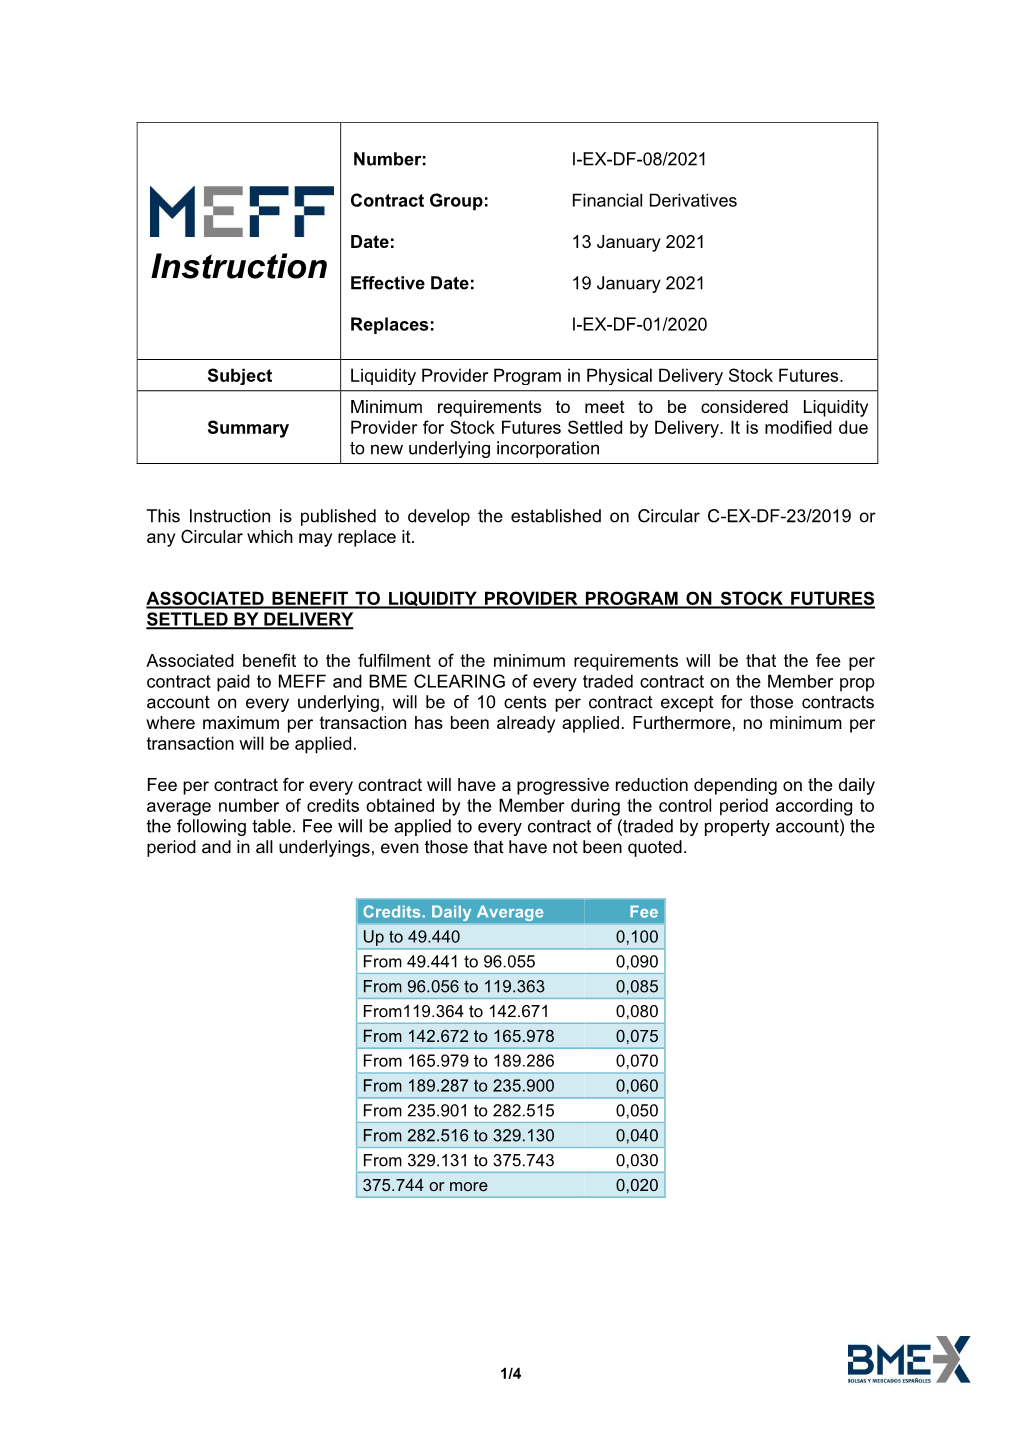 Liquidity Provider Program in Physical Delivery Stock Futures